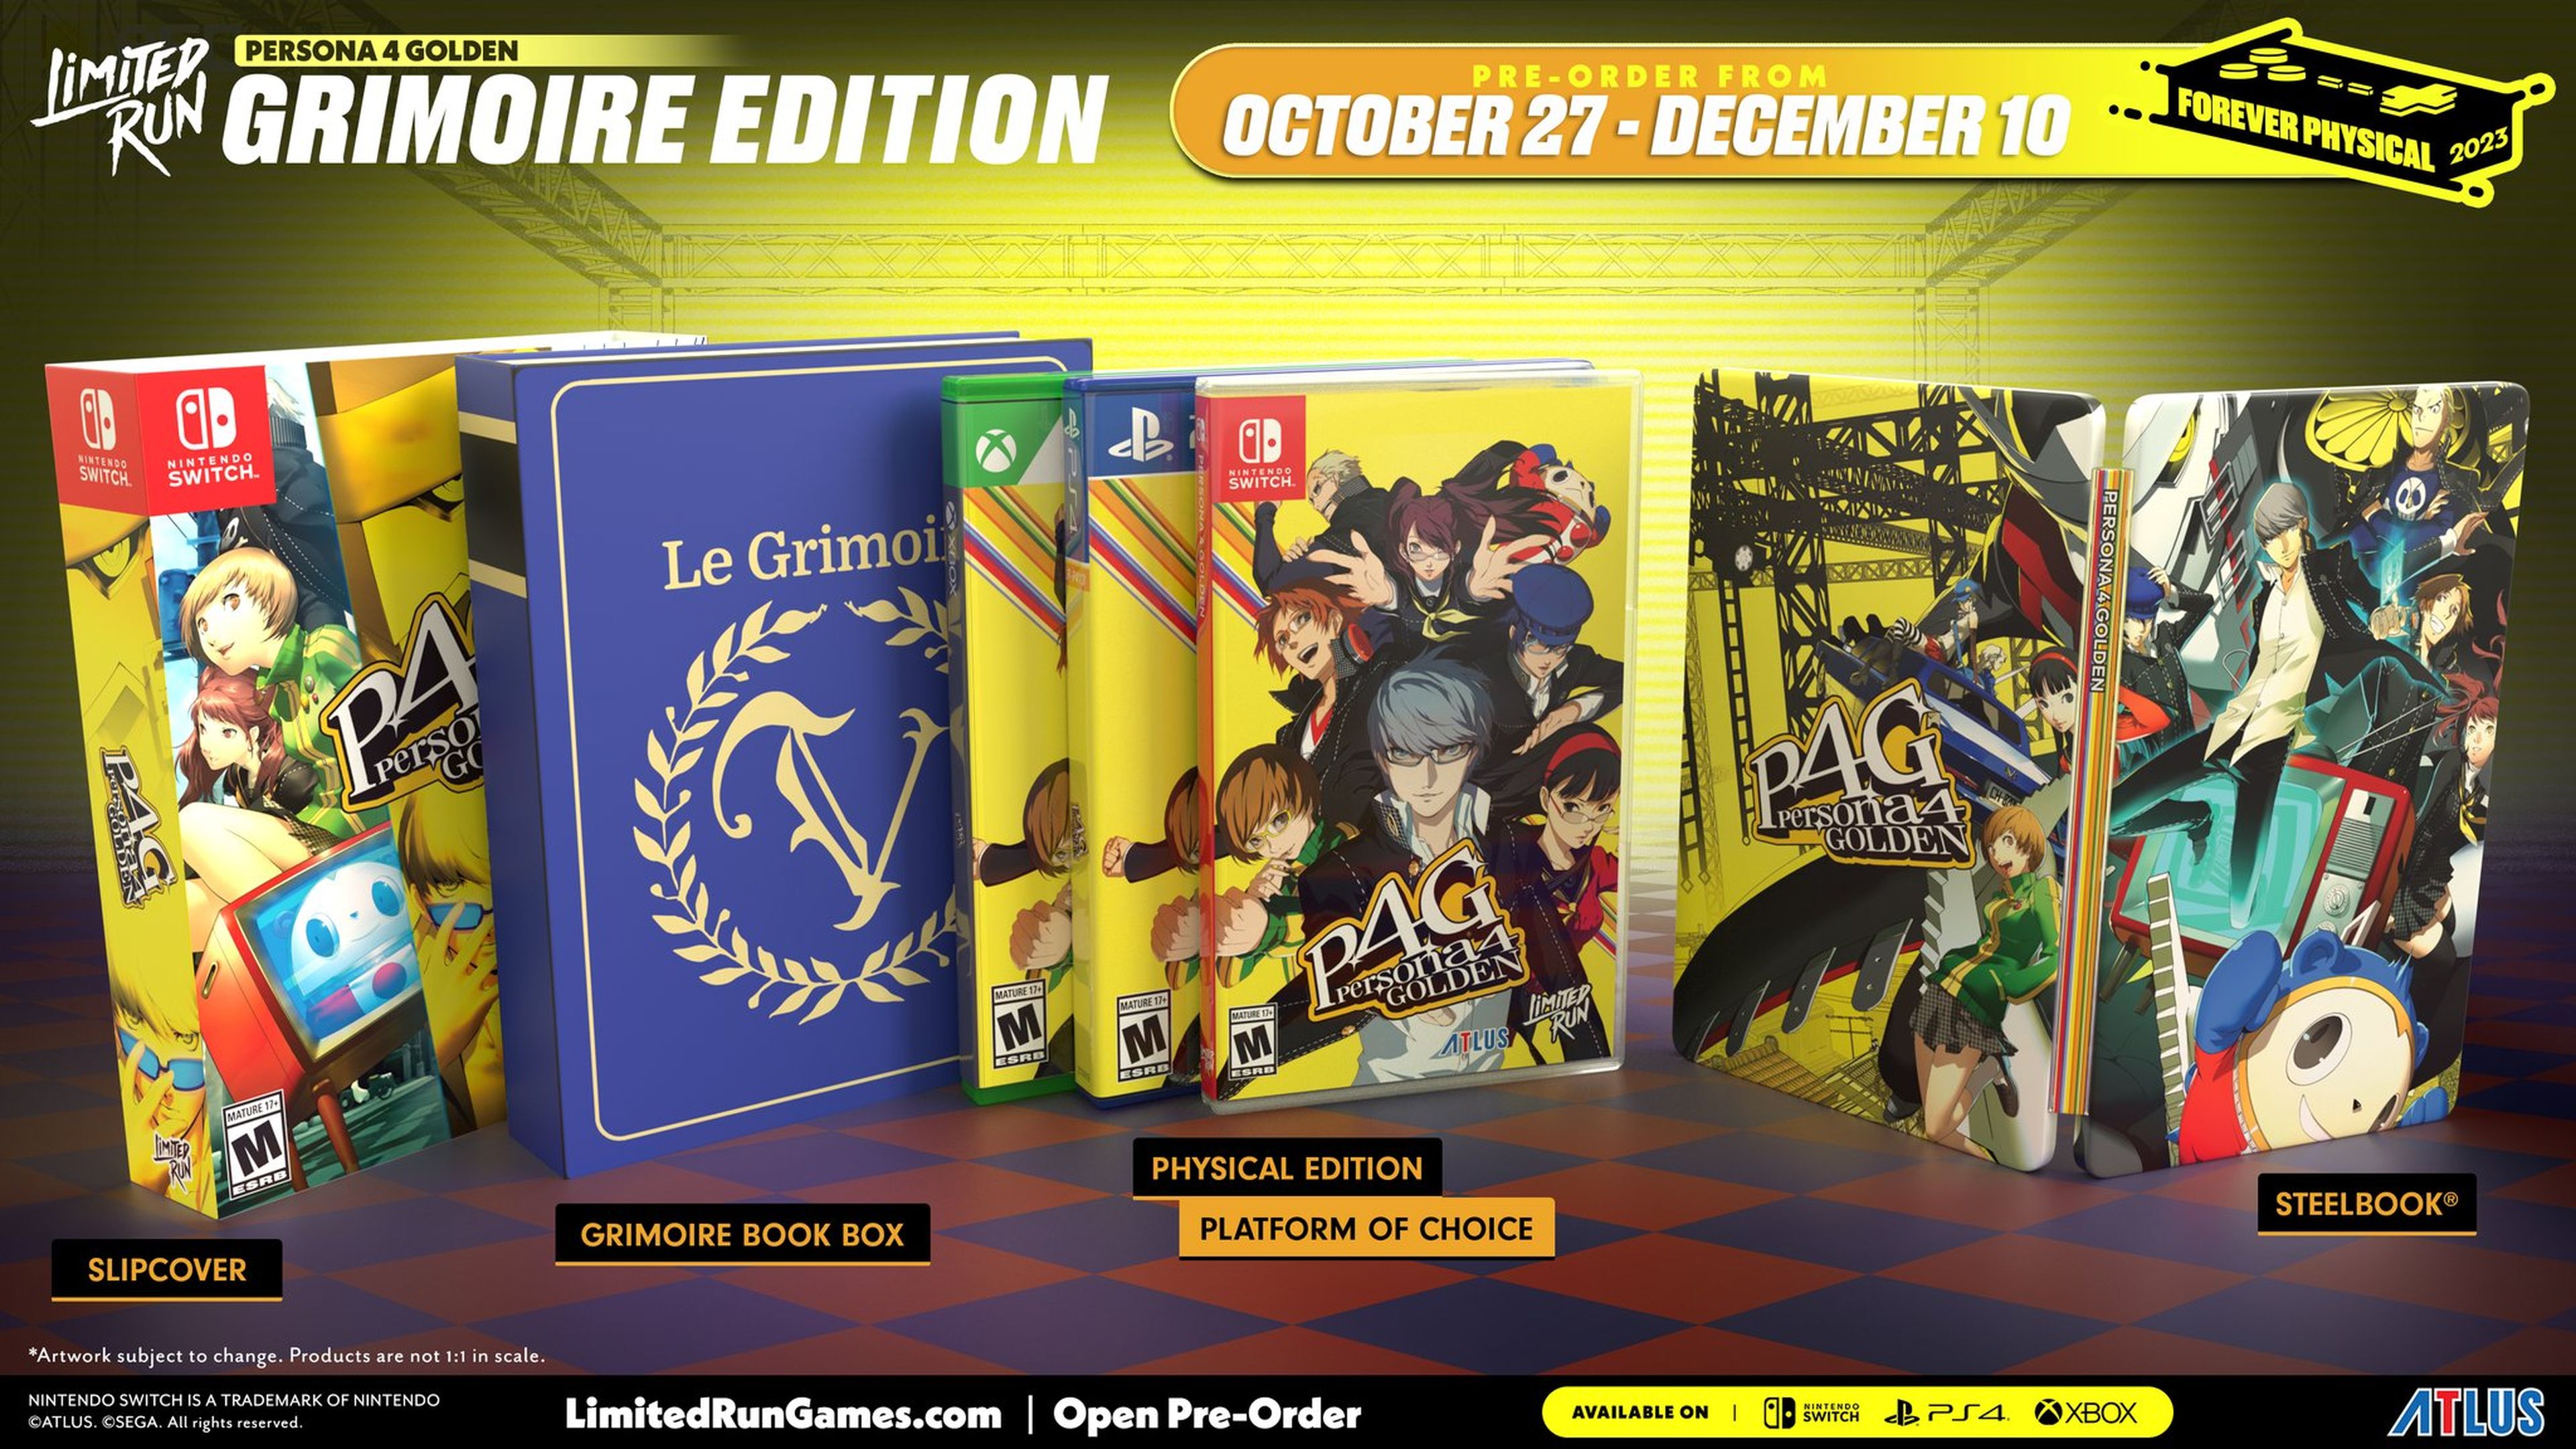 Persona 4 Golden Limited Run